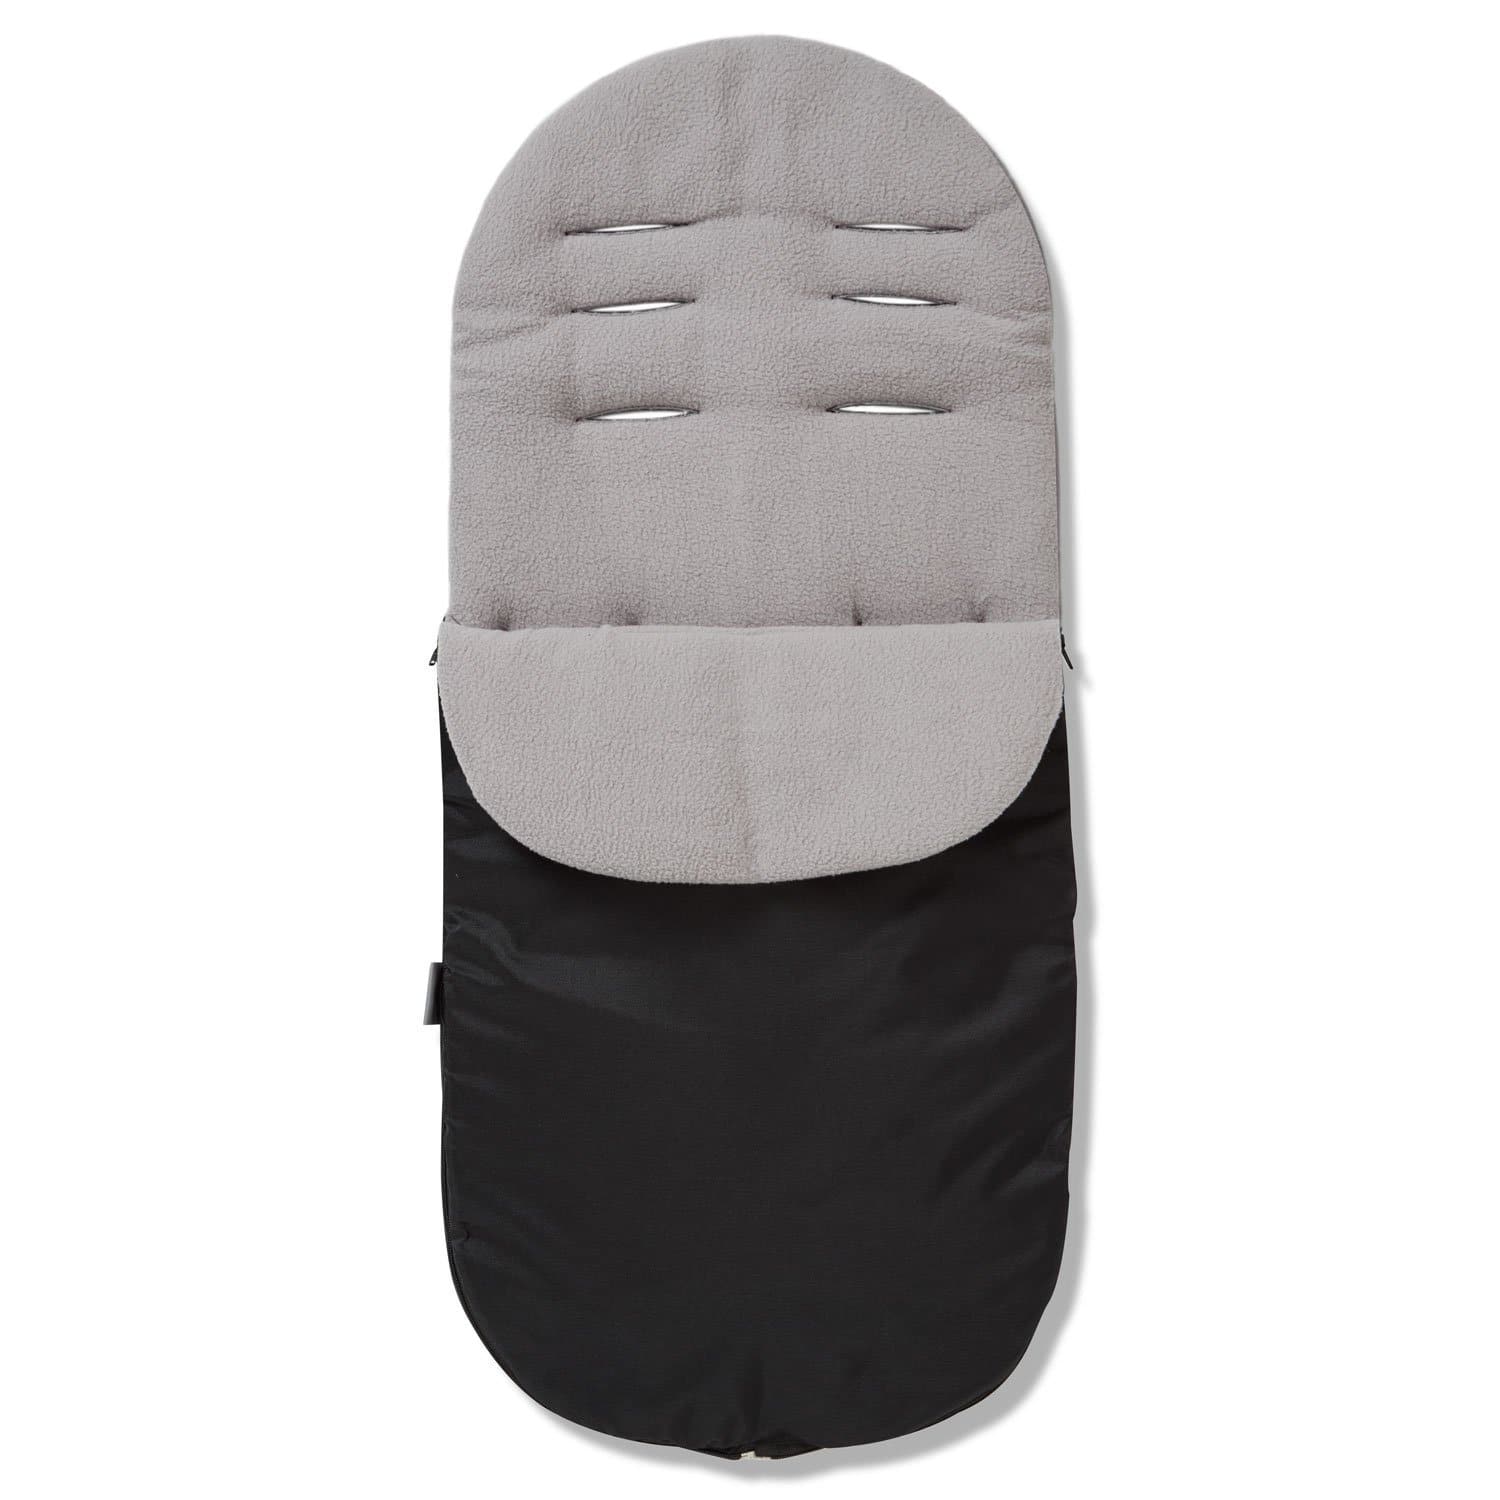 Footmuff / Cosy Toes Compatible with Babylo - Grey / Fits All Models | For Your Little One